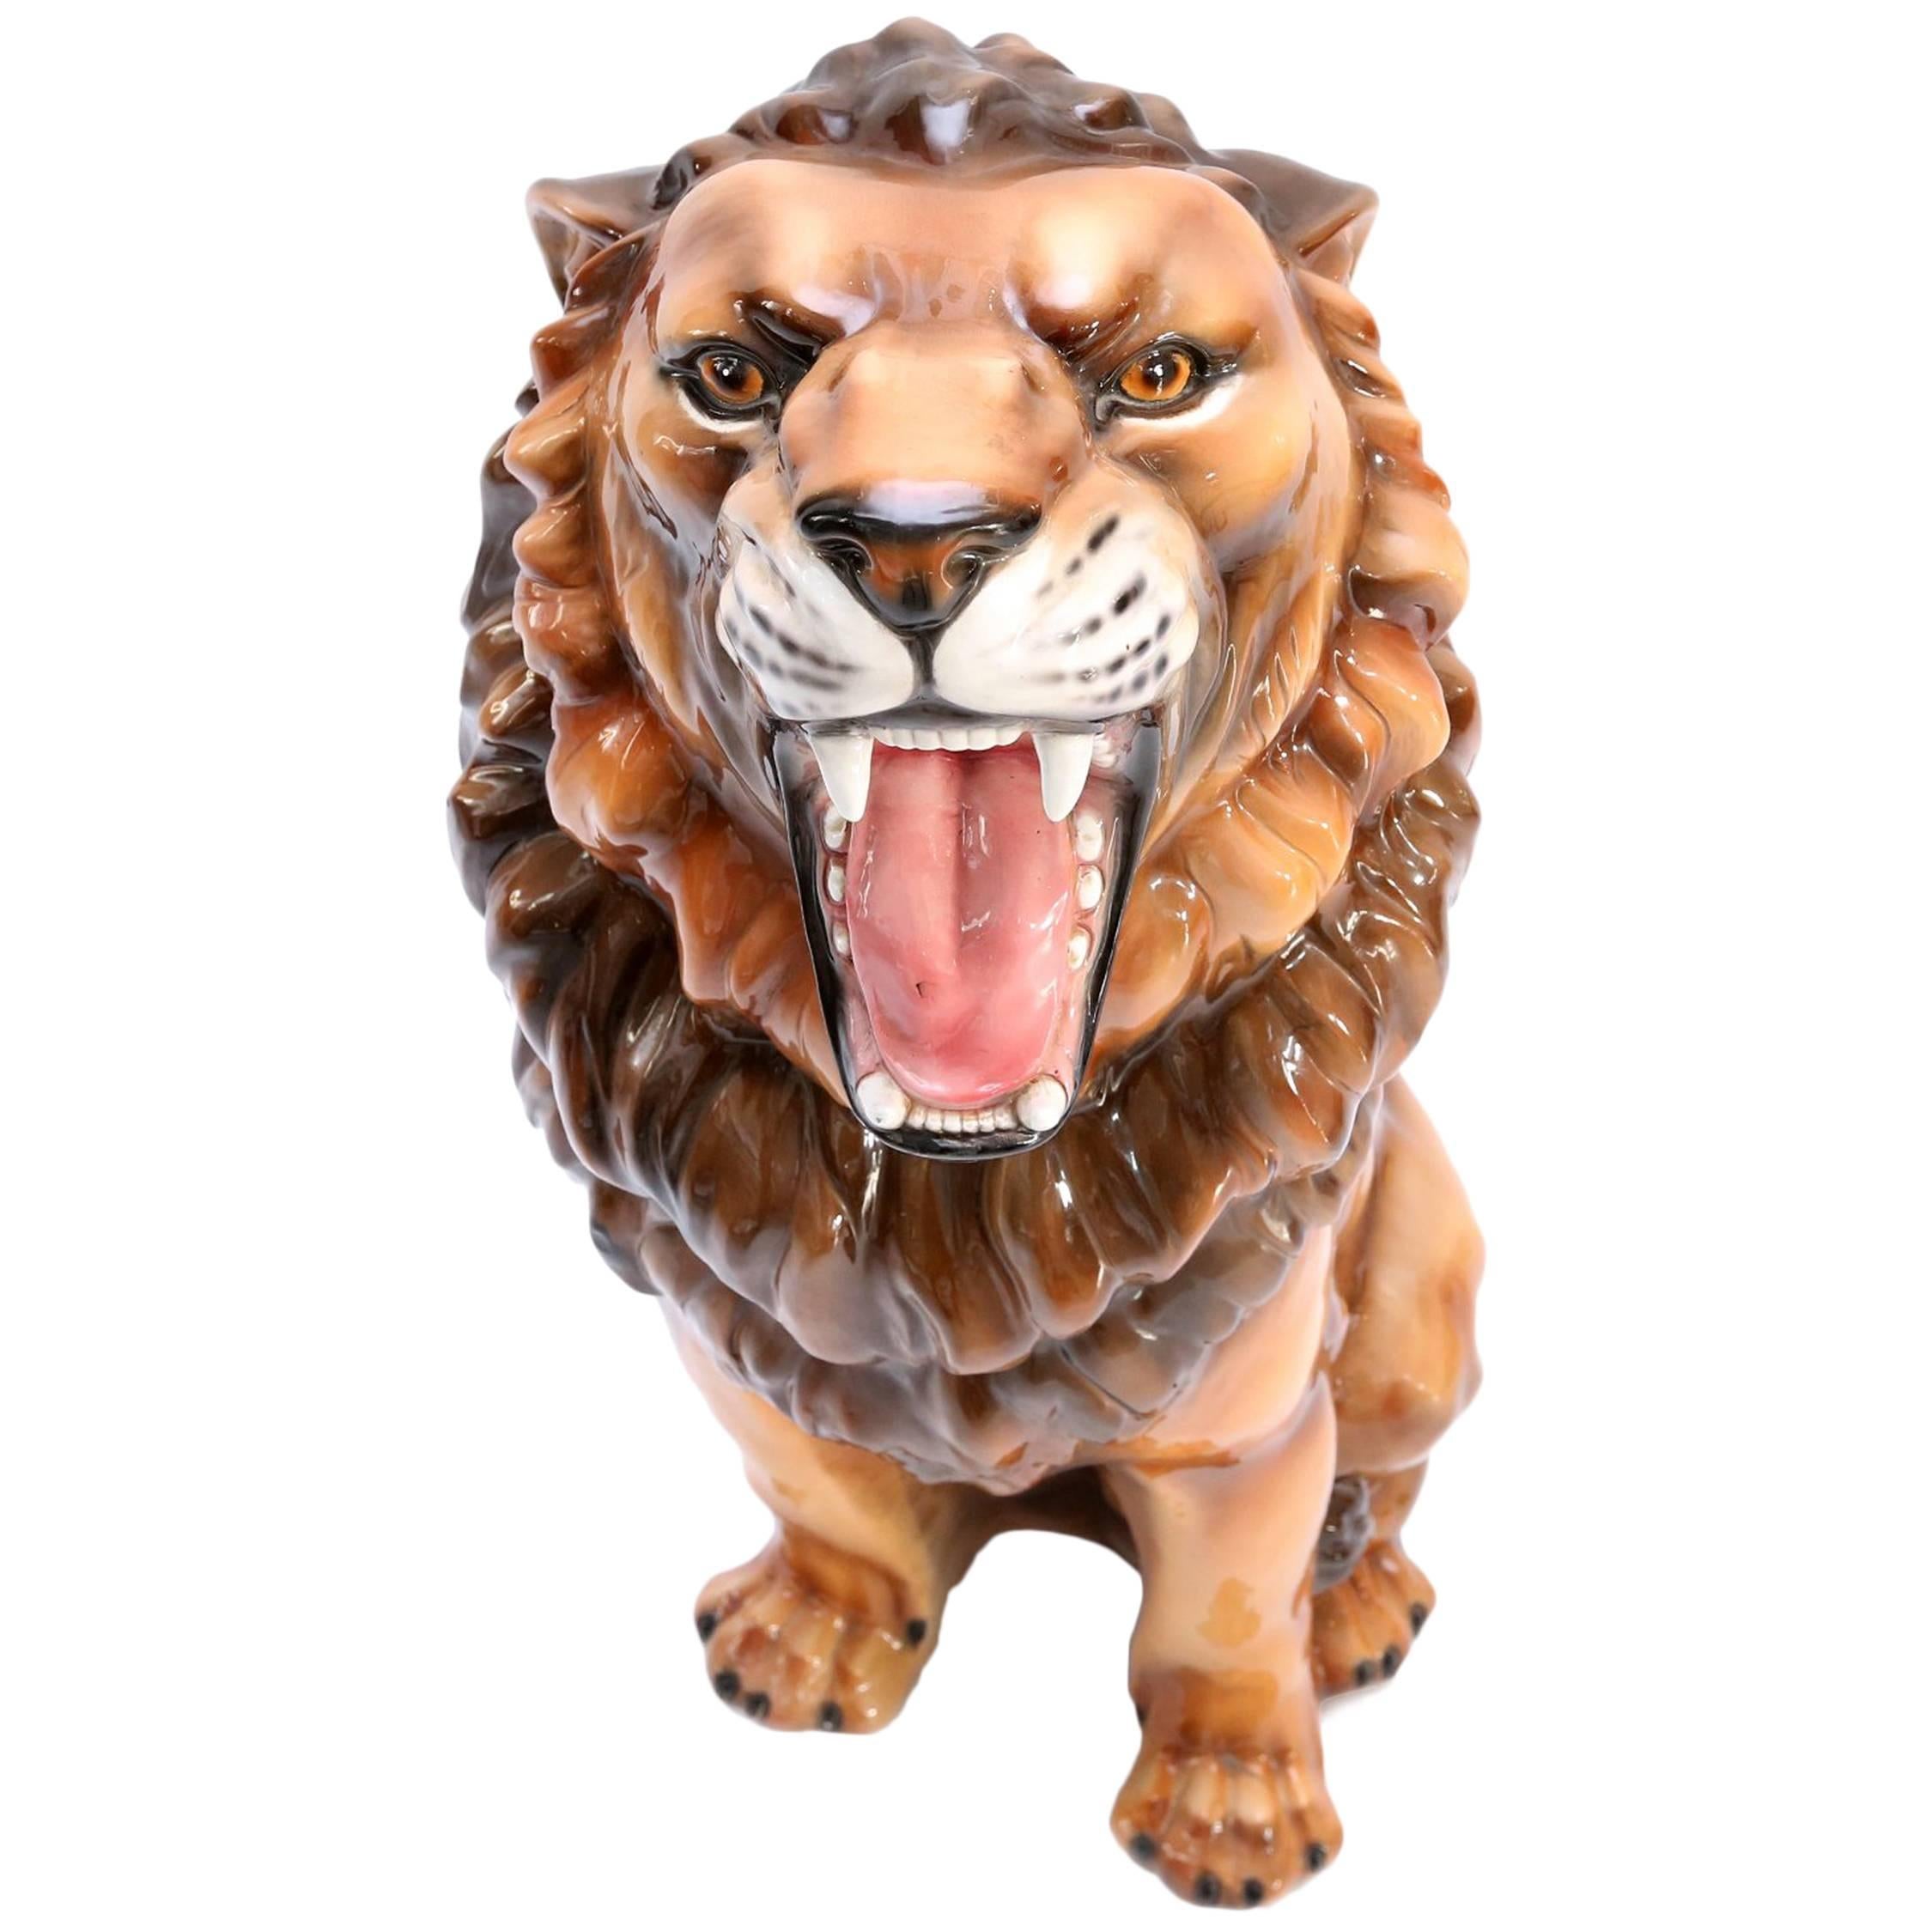 Hollywood Regency ceramic lion sculpture.
Sitting lion with roaring expression.
hand painted and glazed,

Italy, 1960s.

Measures: H 85 cm x L 55 cm x W 40 cm.

Would fit well in an eclectic tropical interior inspired by Gabriella Crespi or